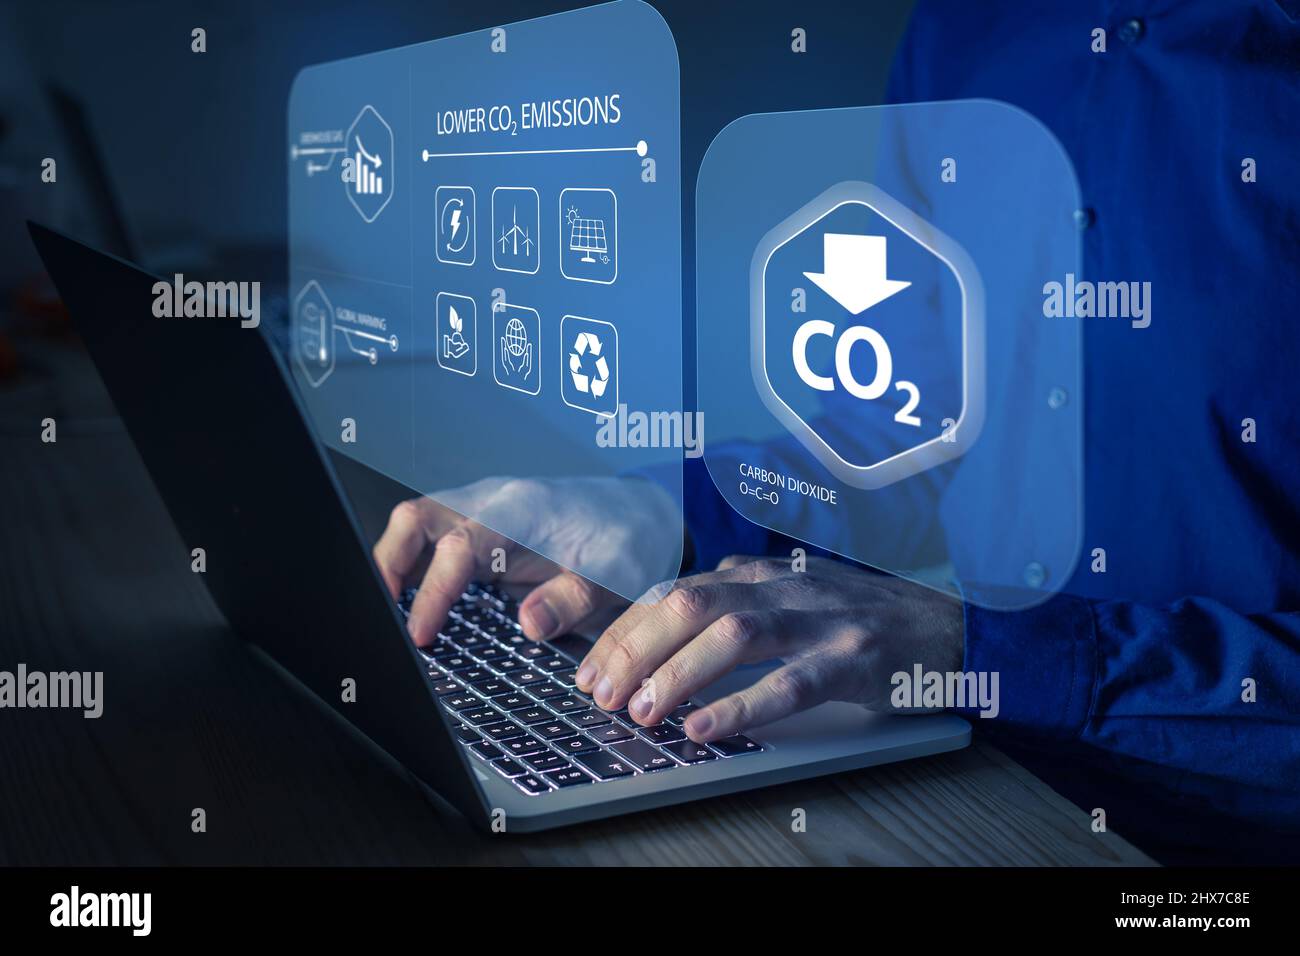 Lower CO2 emissions and carbon footprint to limit global warming and climate change. Net zero greenhouse gas and green business based on renewable ene Stock Photo